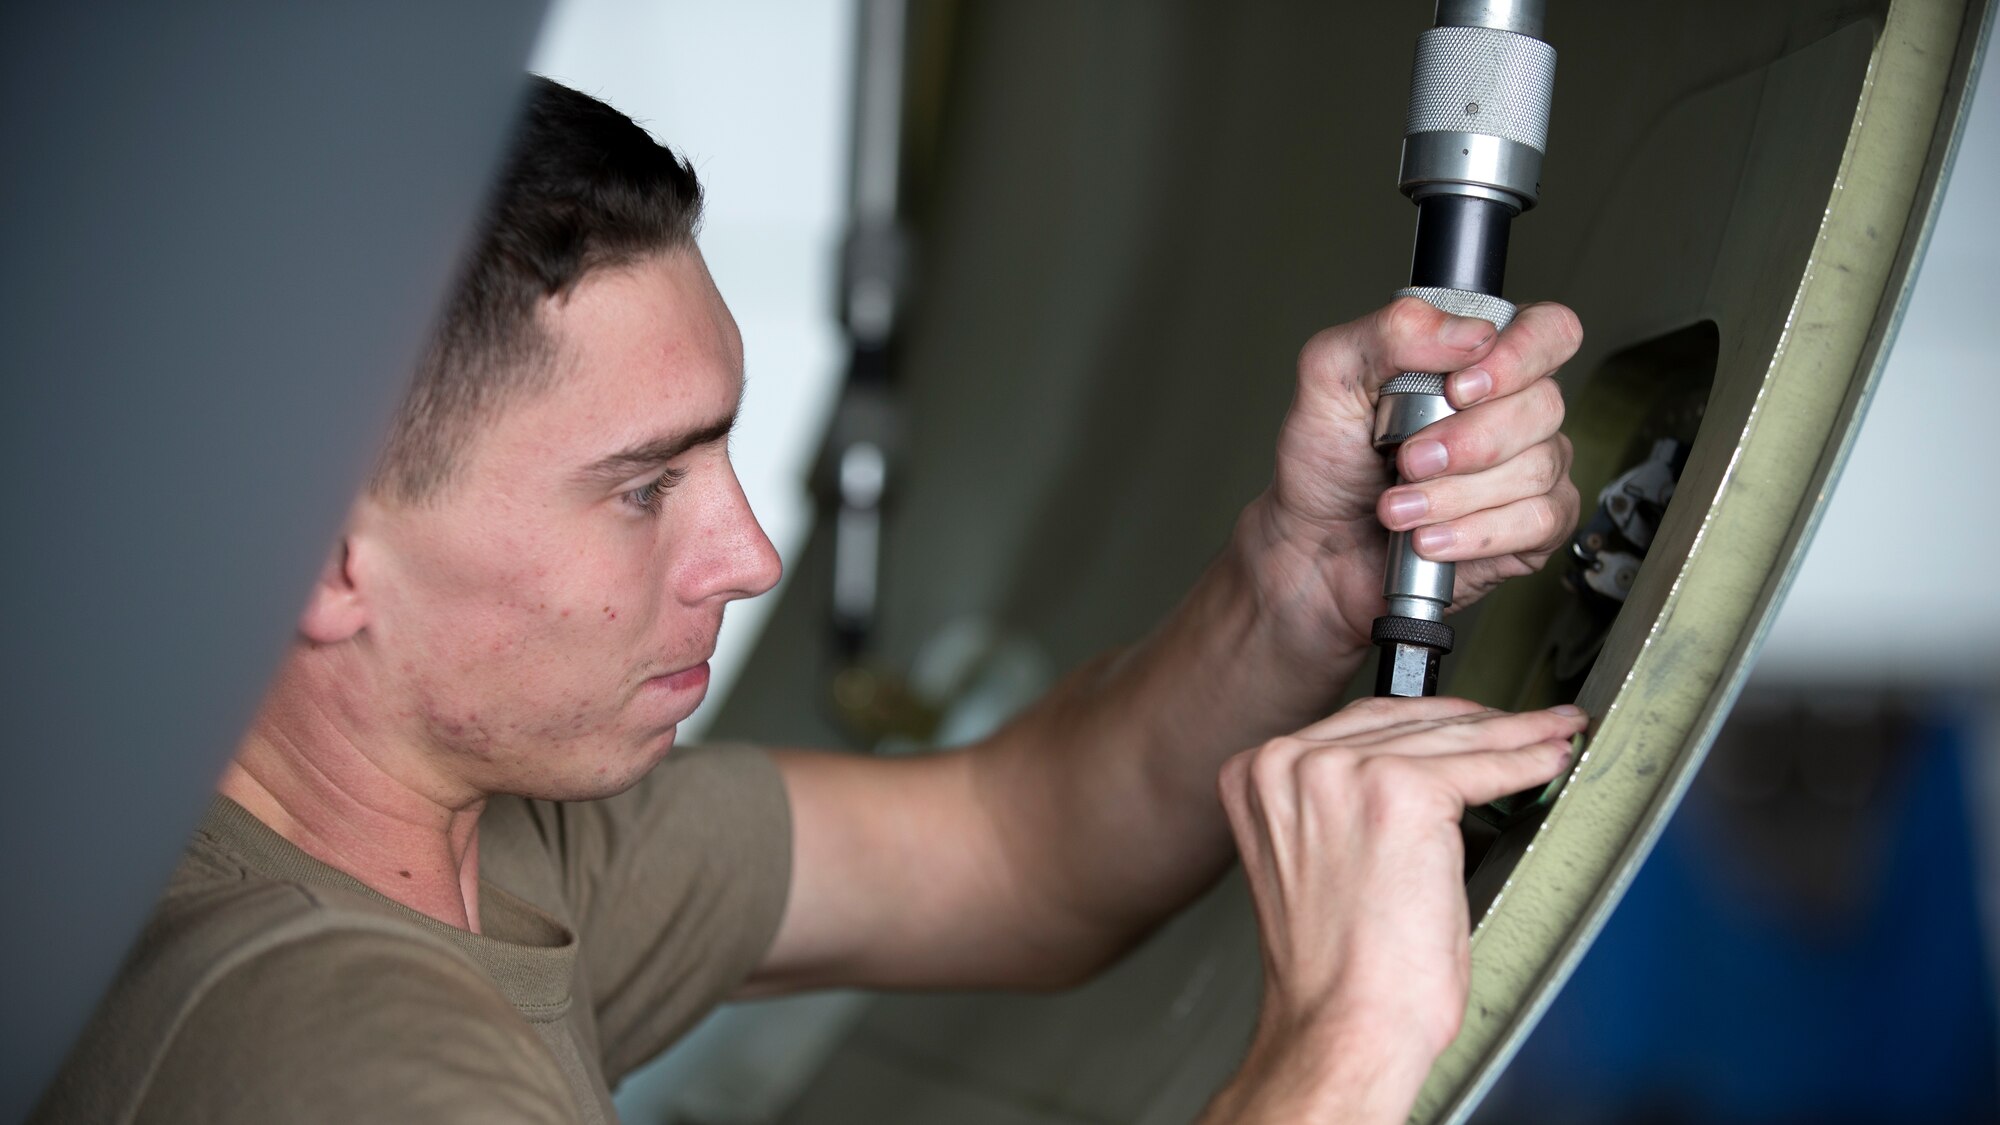 U.S. Air Force Airman 1st Class Caylor Jones, a 6th Aircraft Maintenance Squadron communications and navigation apprentice, unlatches a cowling door on a KC-135 Stratotanker aircraft at MacDill Air Force Base, Fla., Nov. 19, 2018.